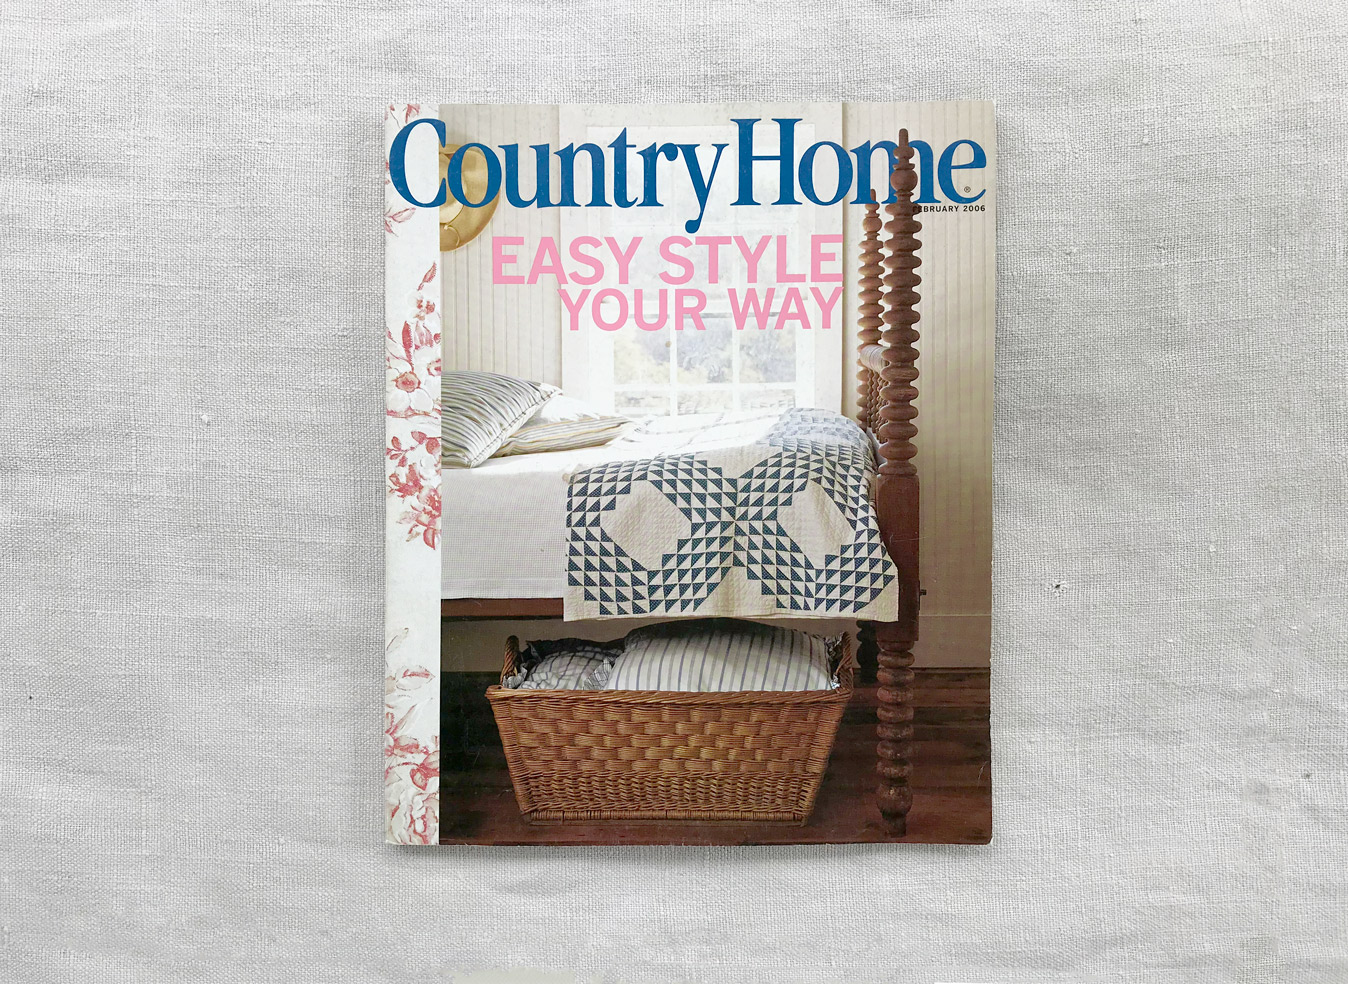 CountryHome_Feb2006_cover.jpg